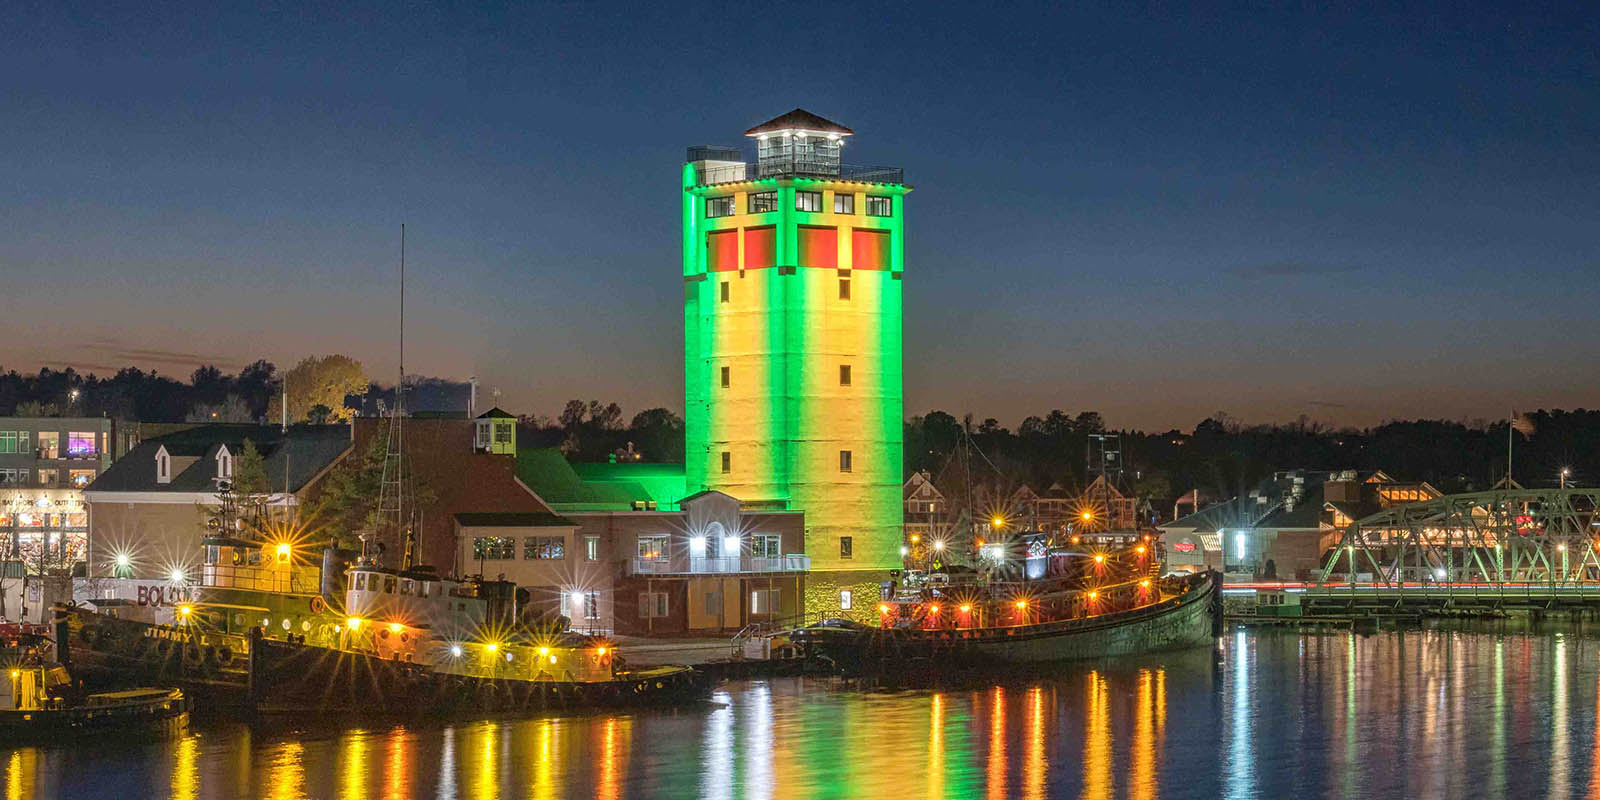 The 11 story tower with Green and Yellow color-changing LED lights at the Door County Maritime Museum in Sturgeon Bay, WI